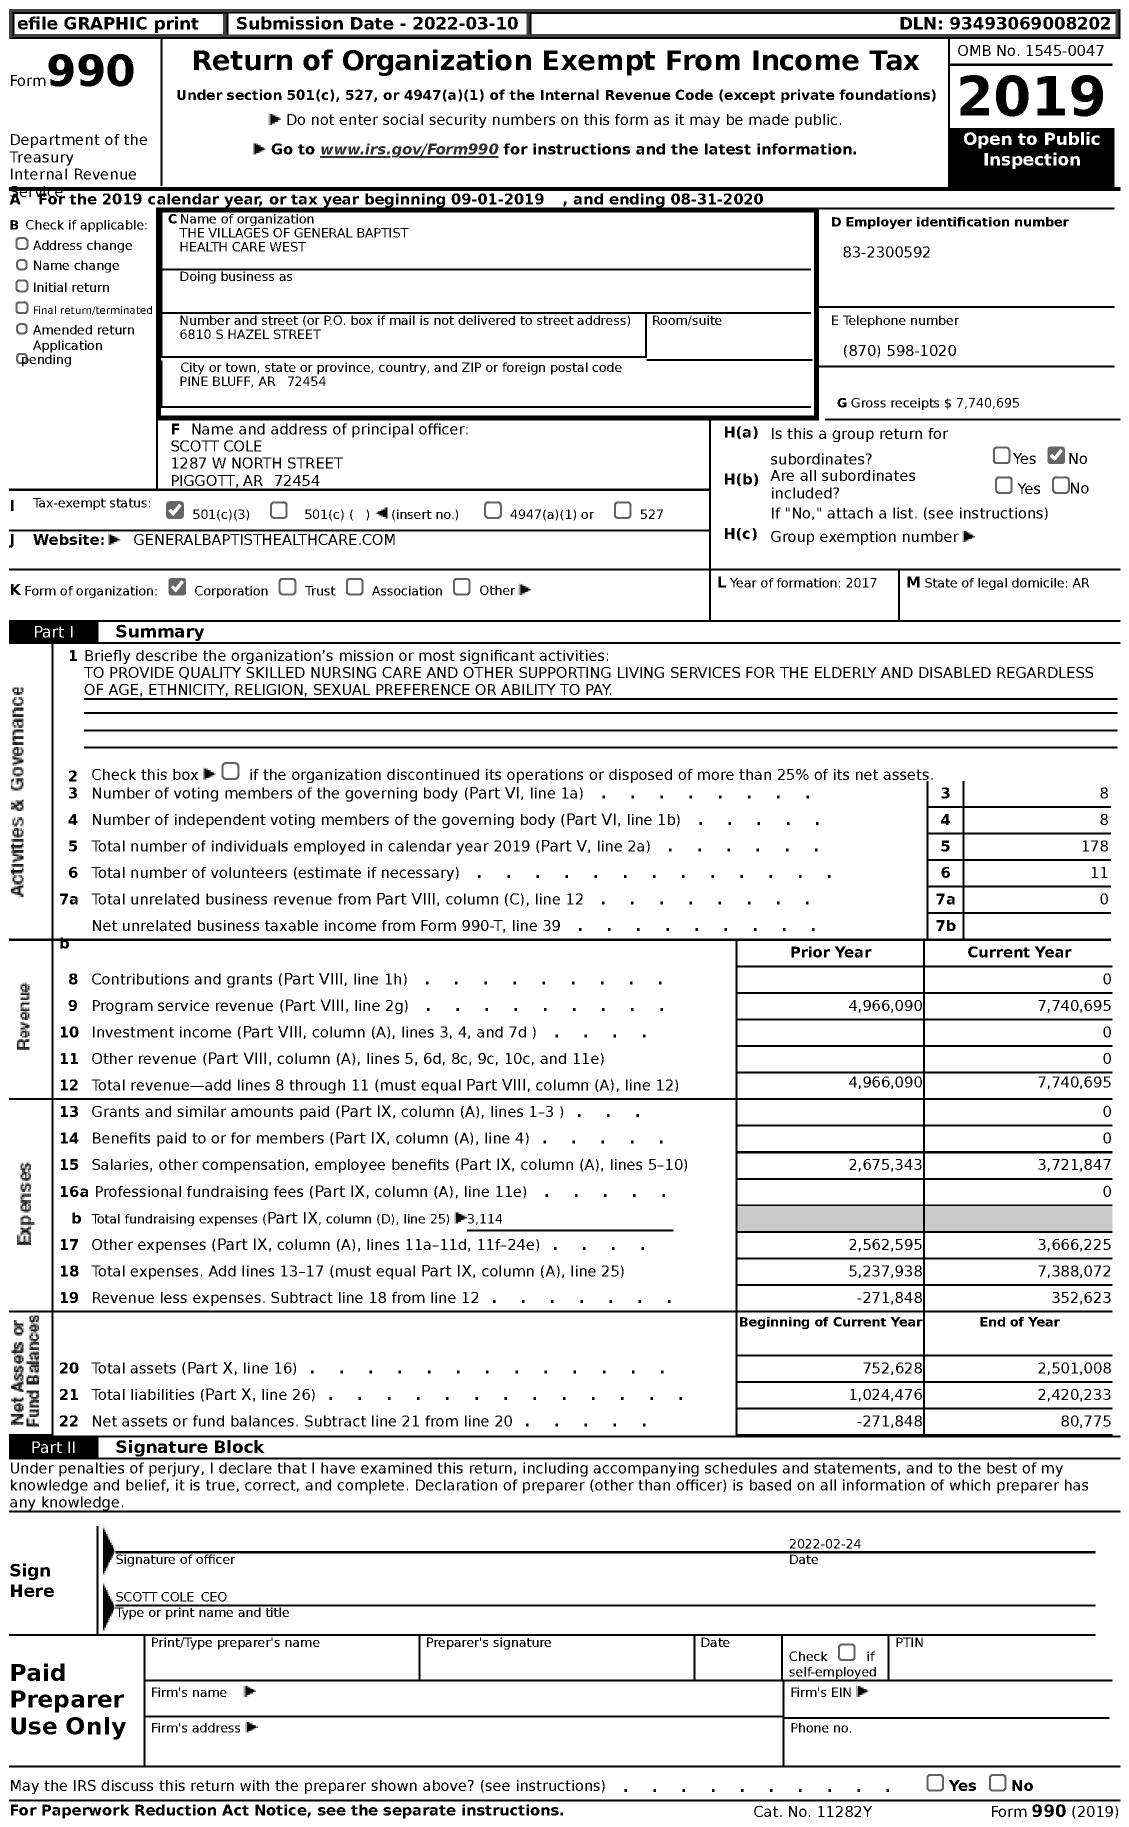 Image of first page of 2019 Form 990 for The Villages of General Baptist Health Care West